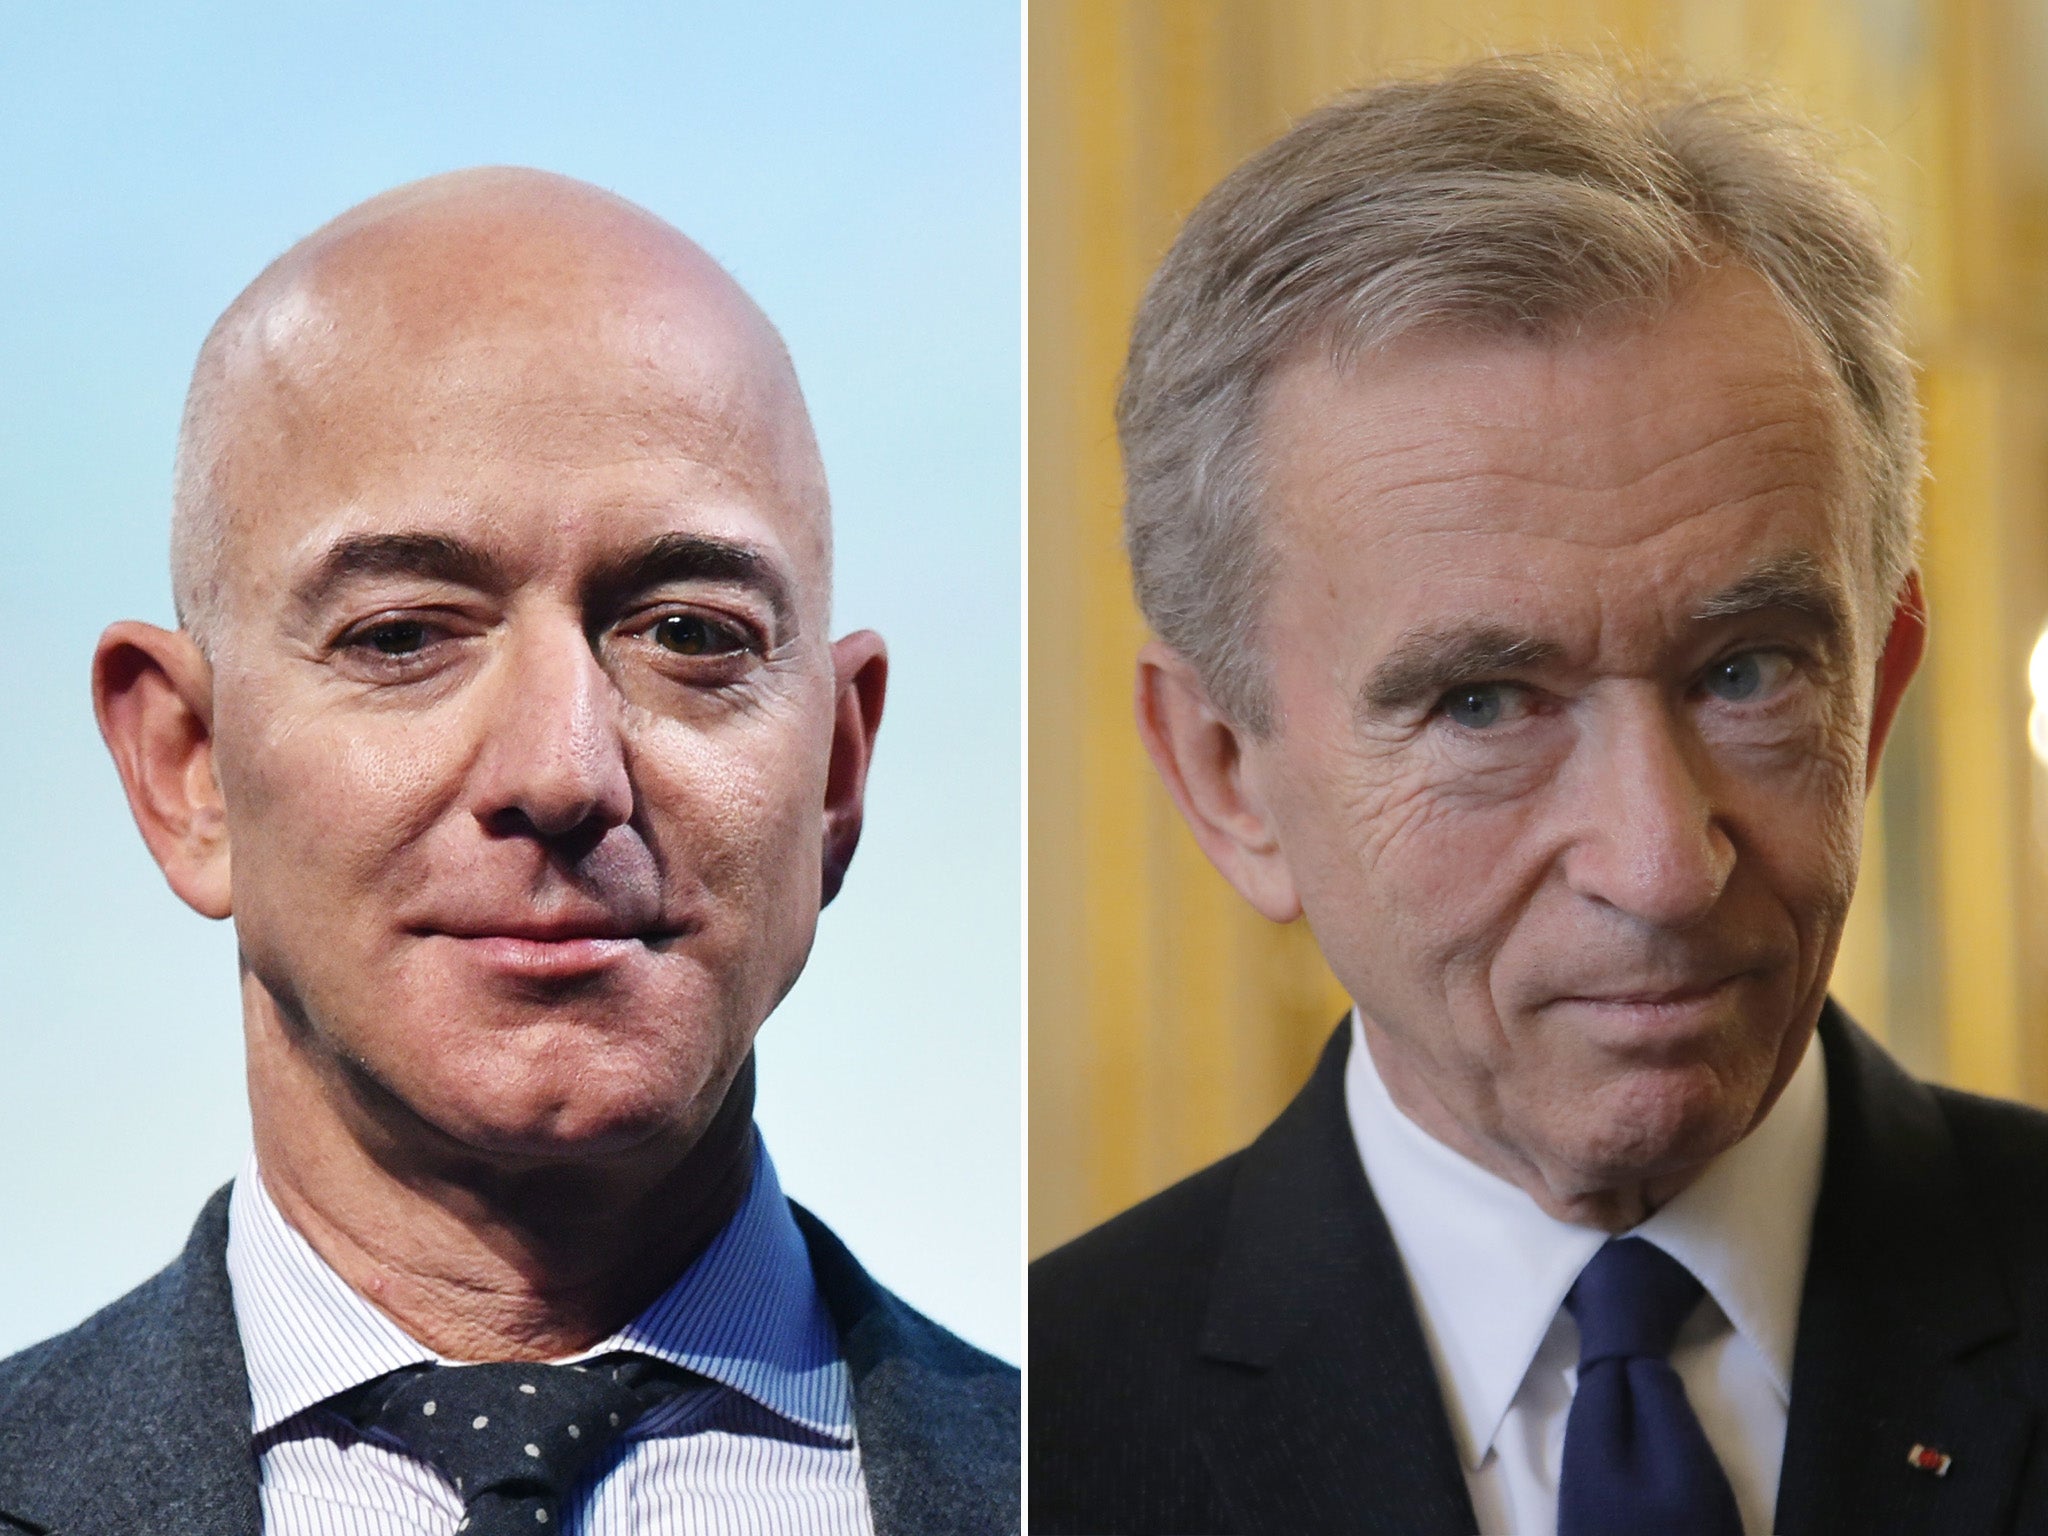 Behind Jeff Bezos and Bernard Arnault tussling to be the world's richest  person lies a bigger issue